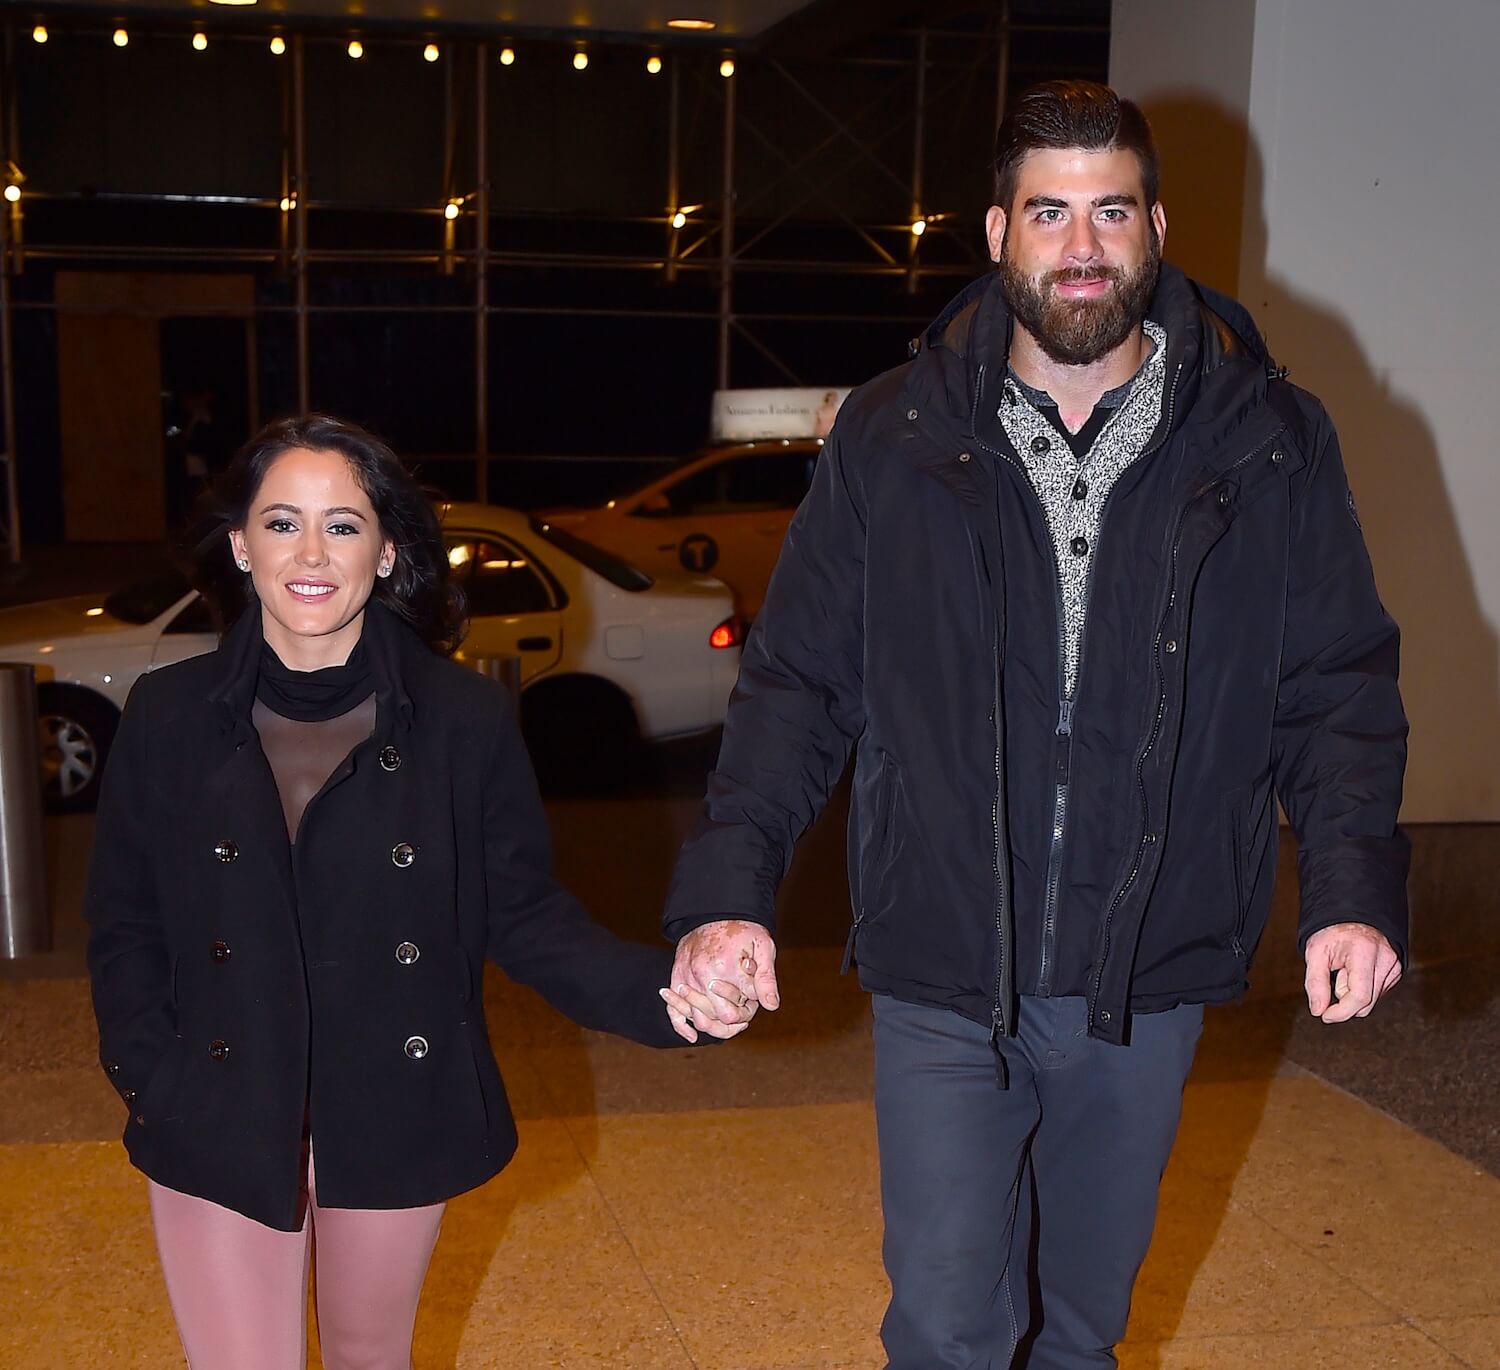 'Teen Mom 2' star Jenelle Evans holding hands with David Eason outdoors